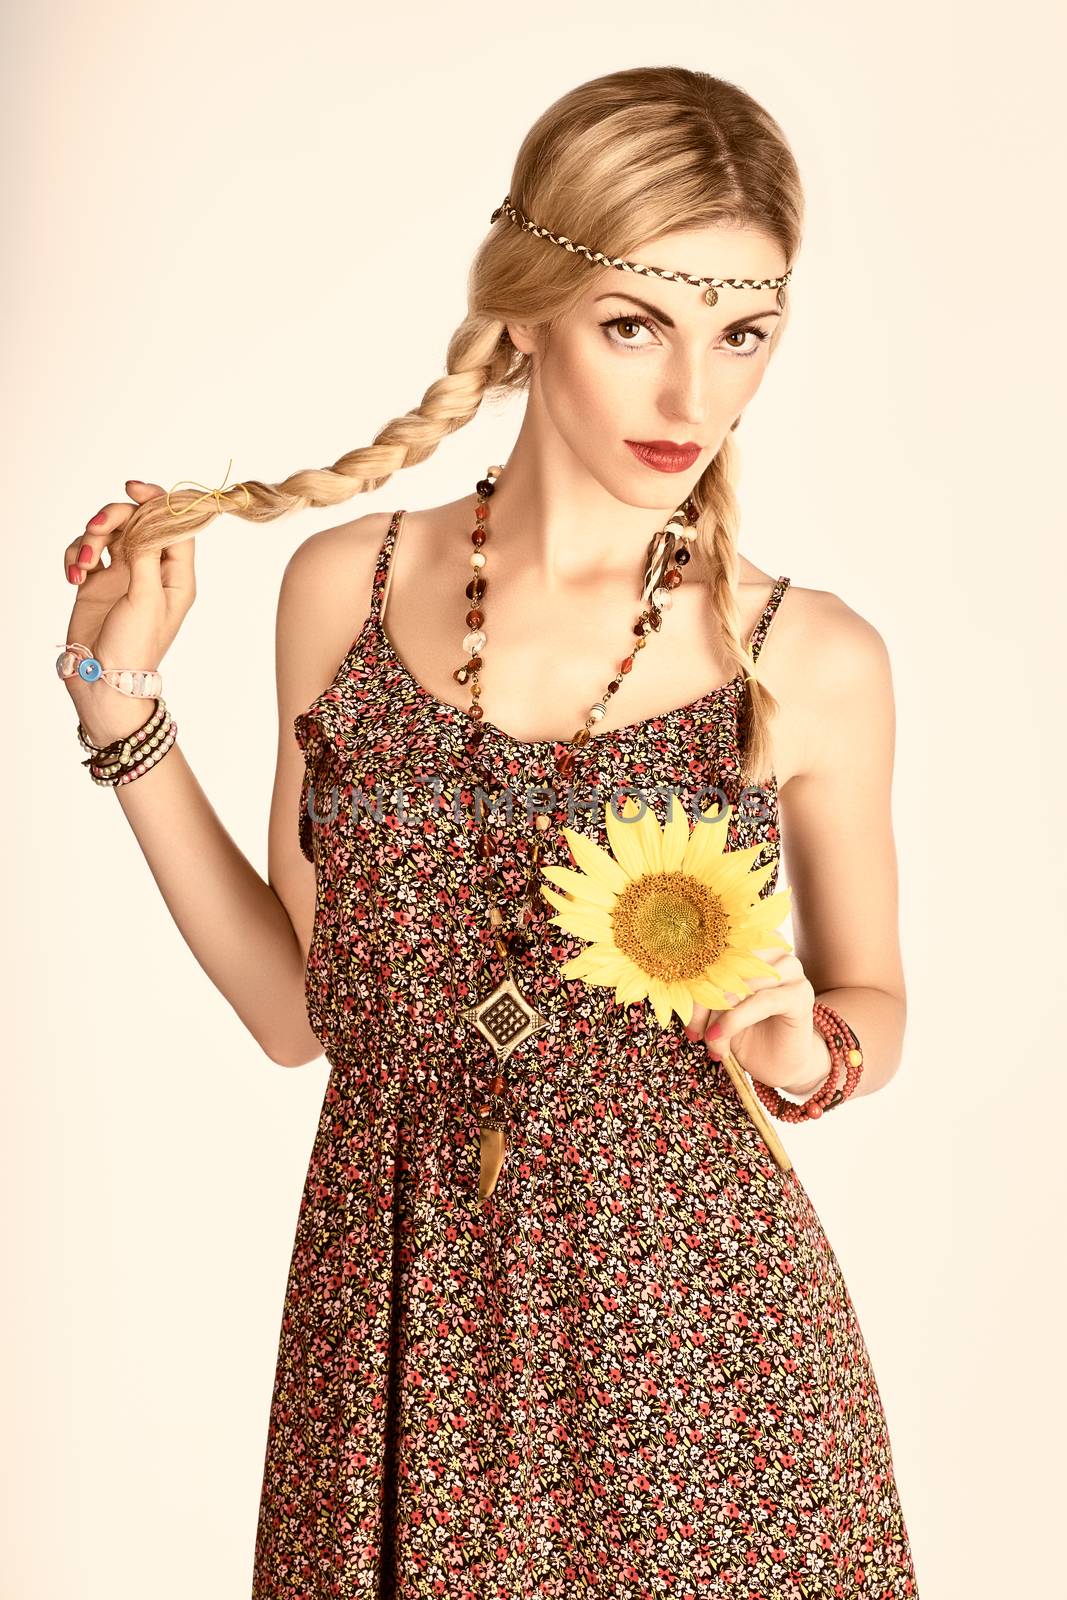 Hippie boho woman with sunflower. Romantic style by 918